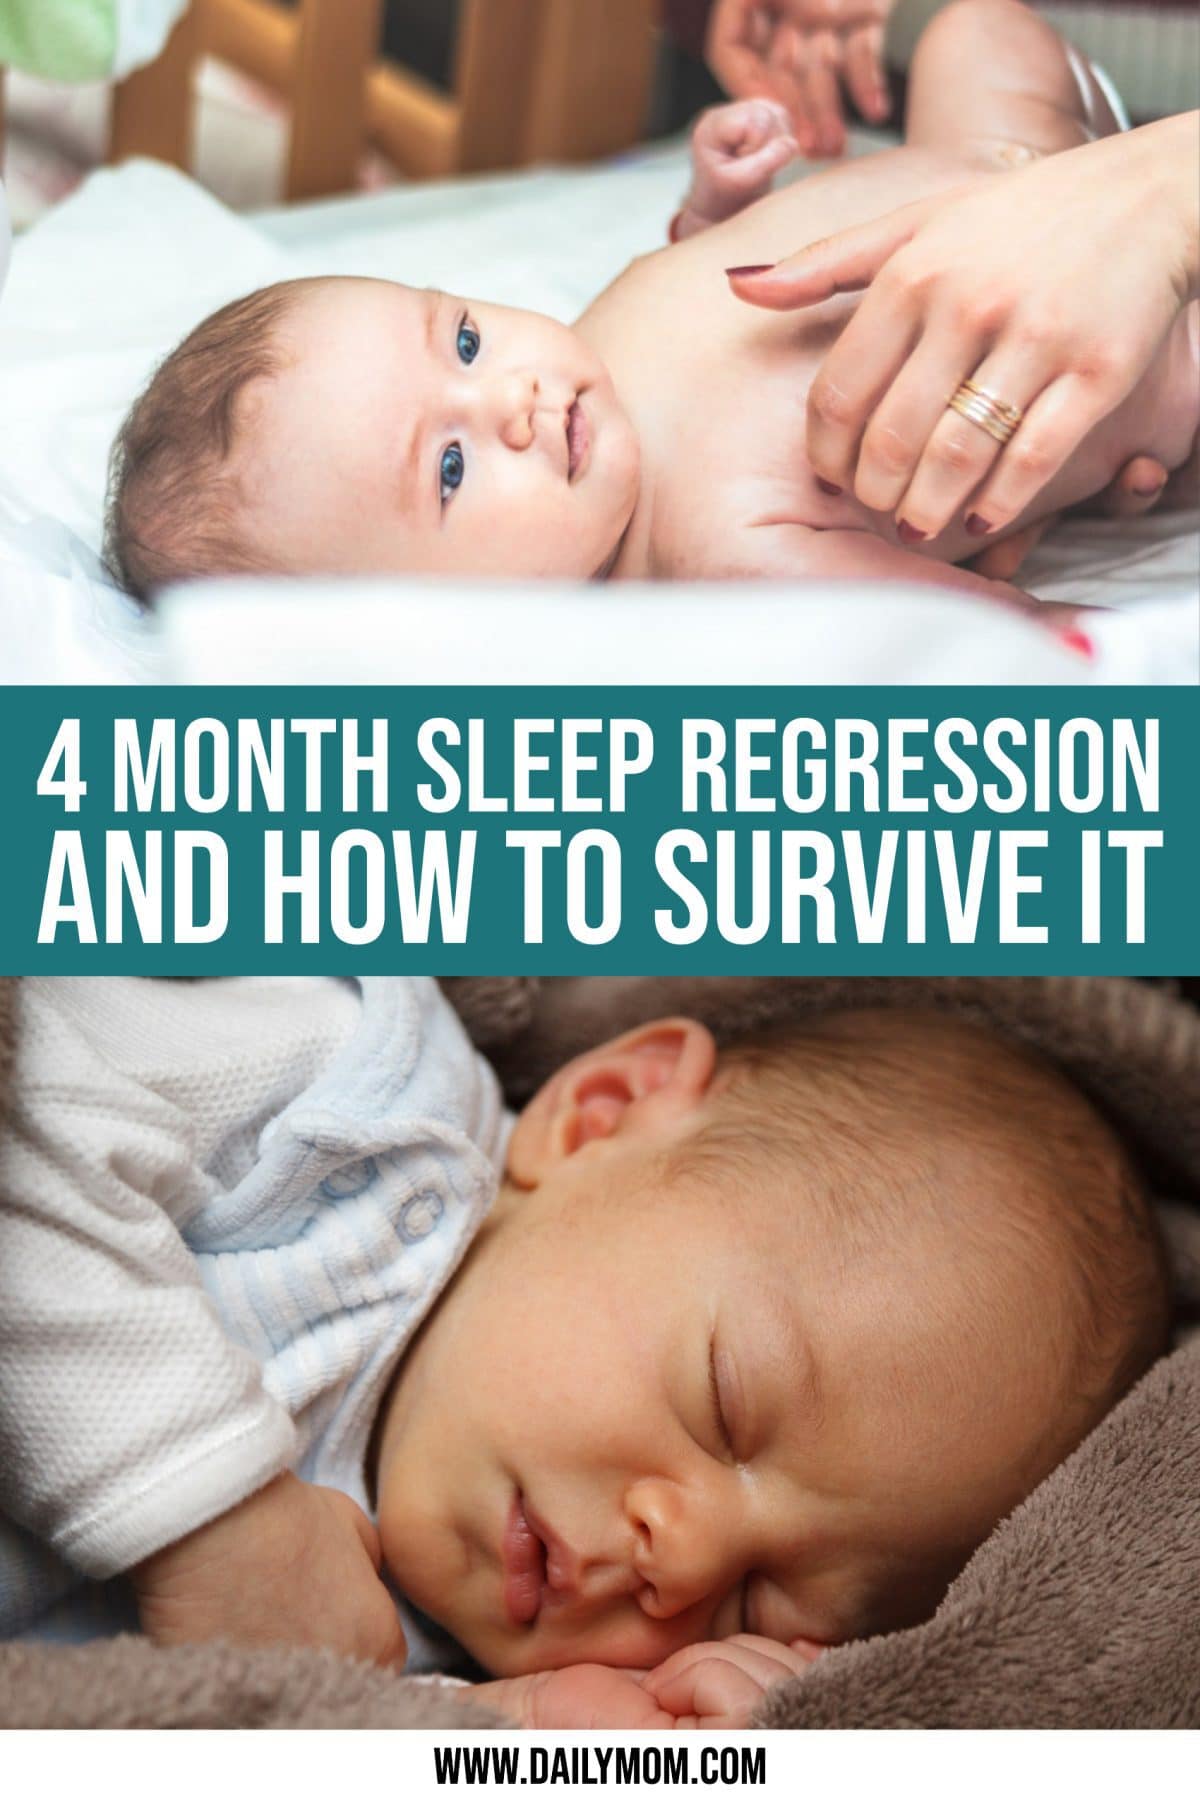 4 Month Sleep Regression And How To Survive It